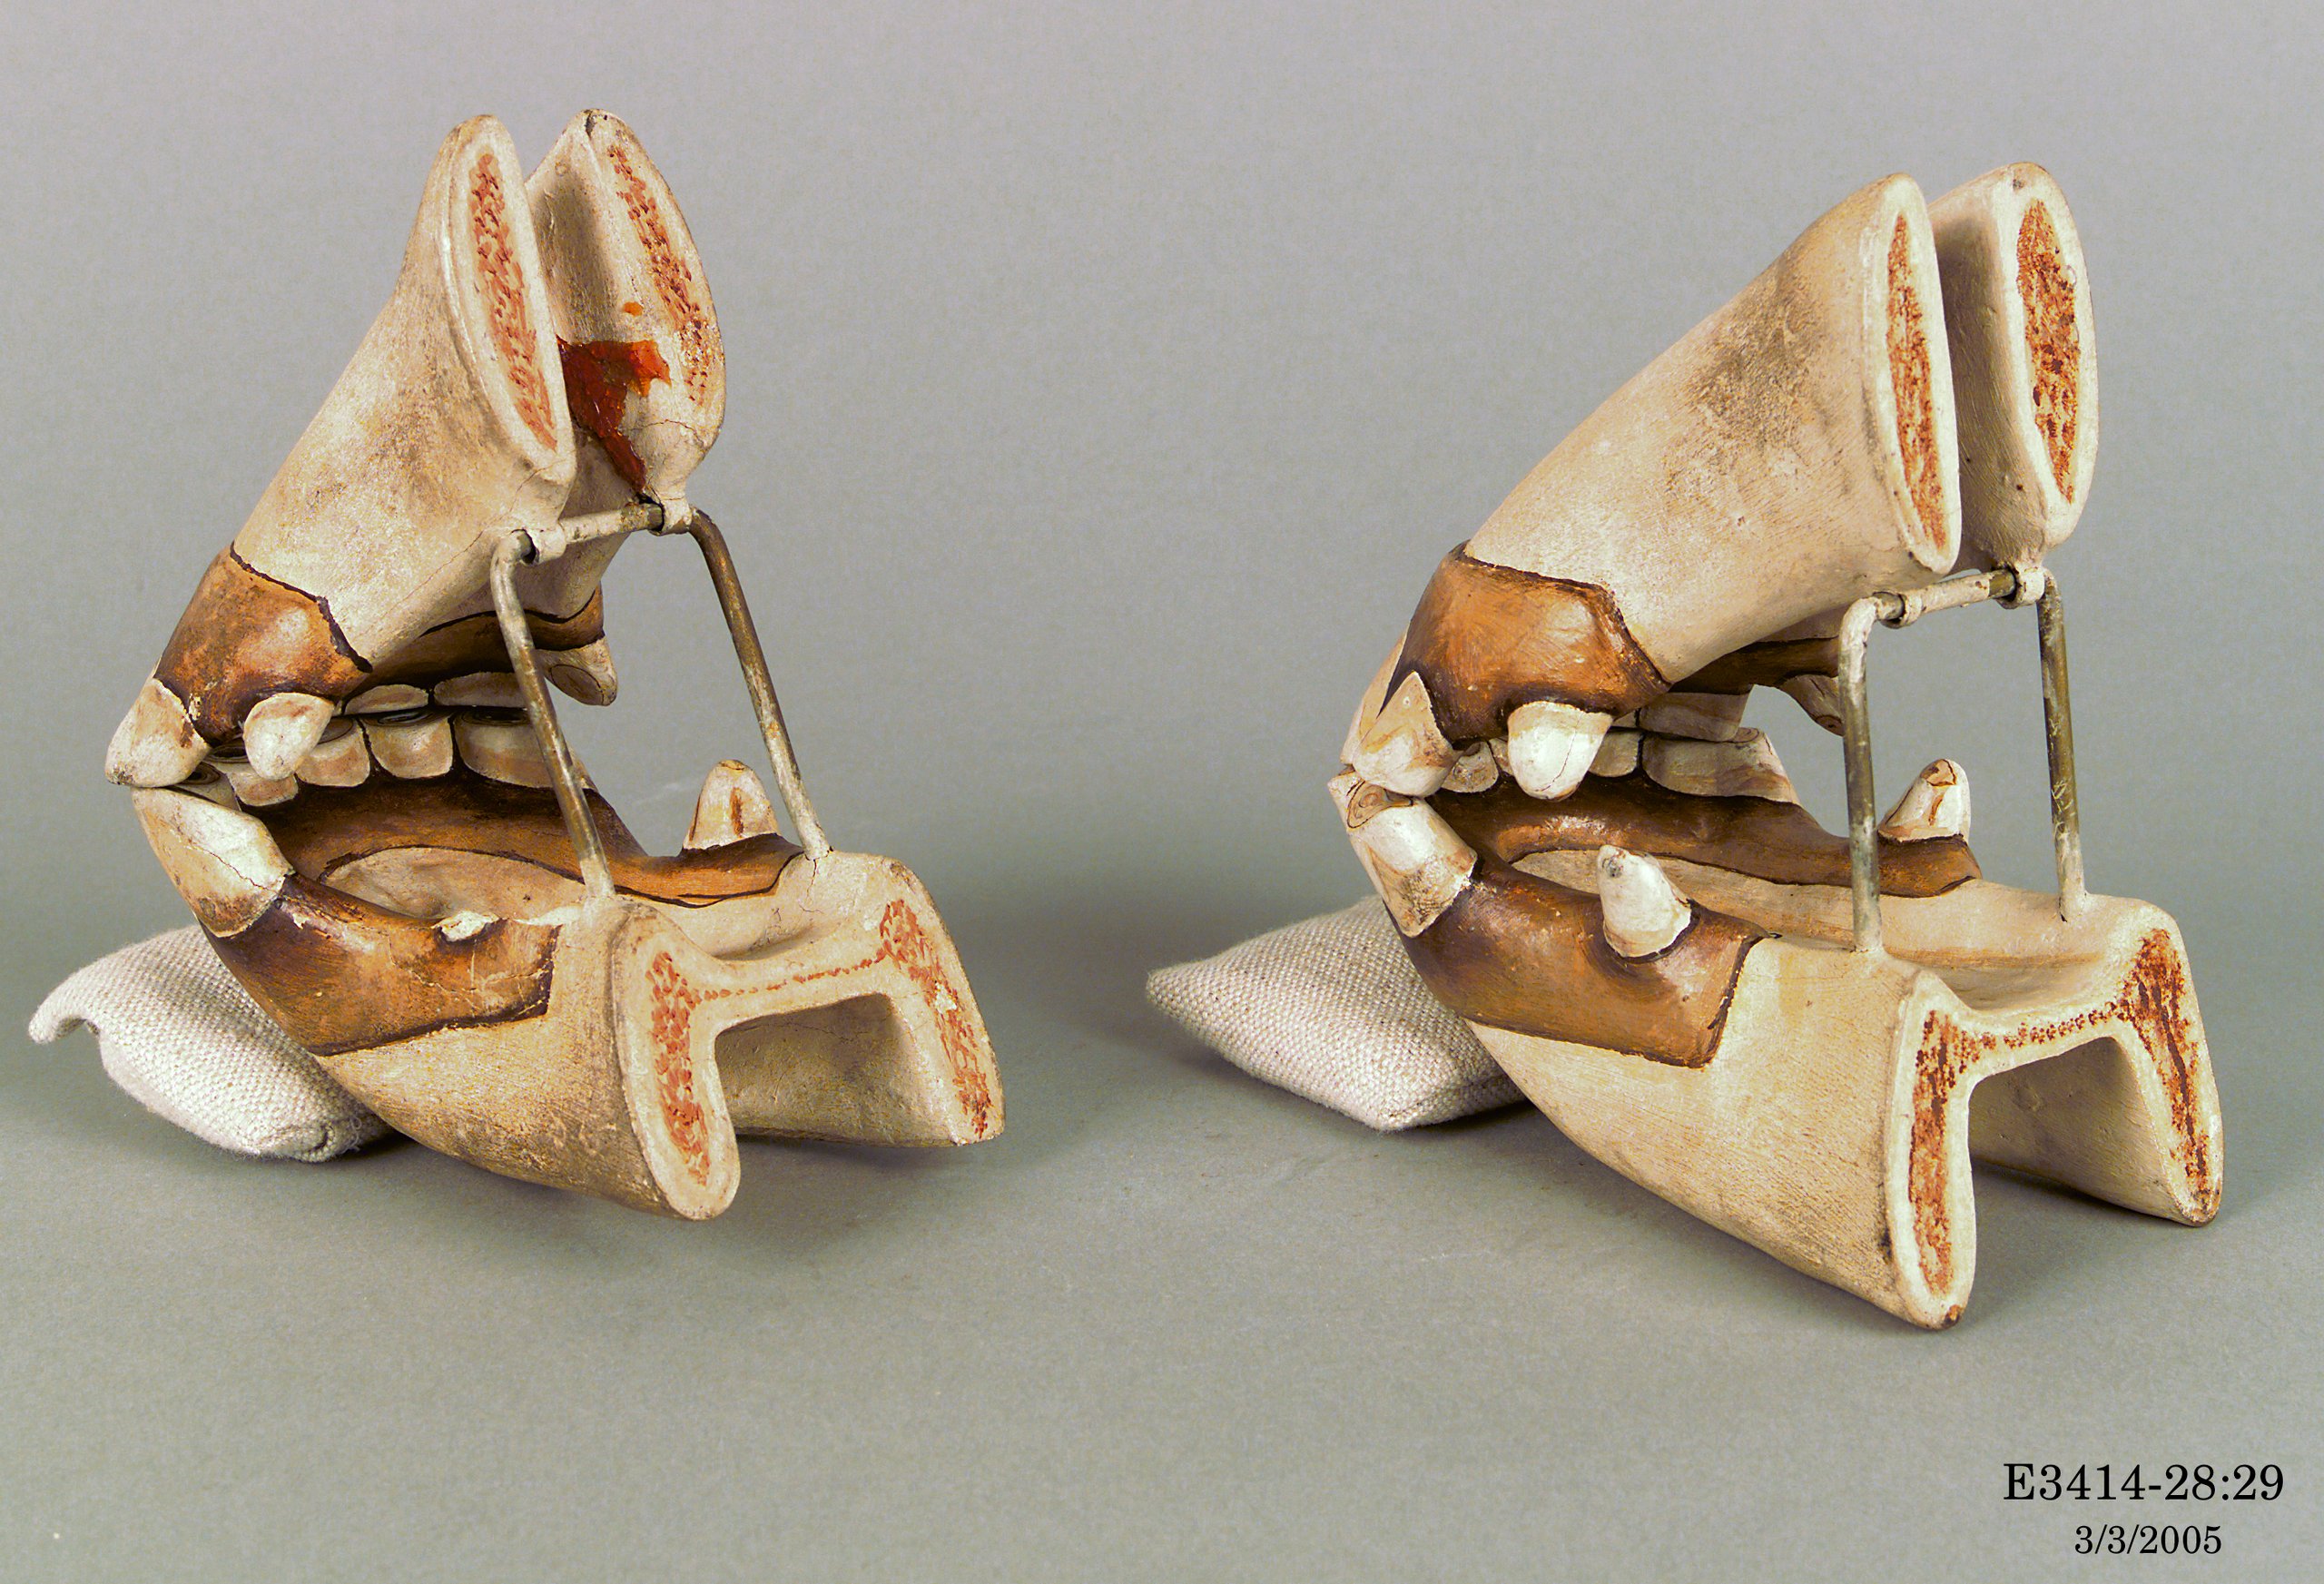 Collection of plaster casts of horse teeth ranging from birth to old age